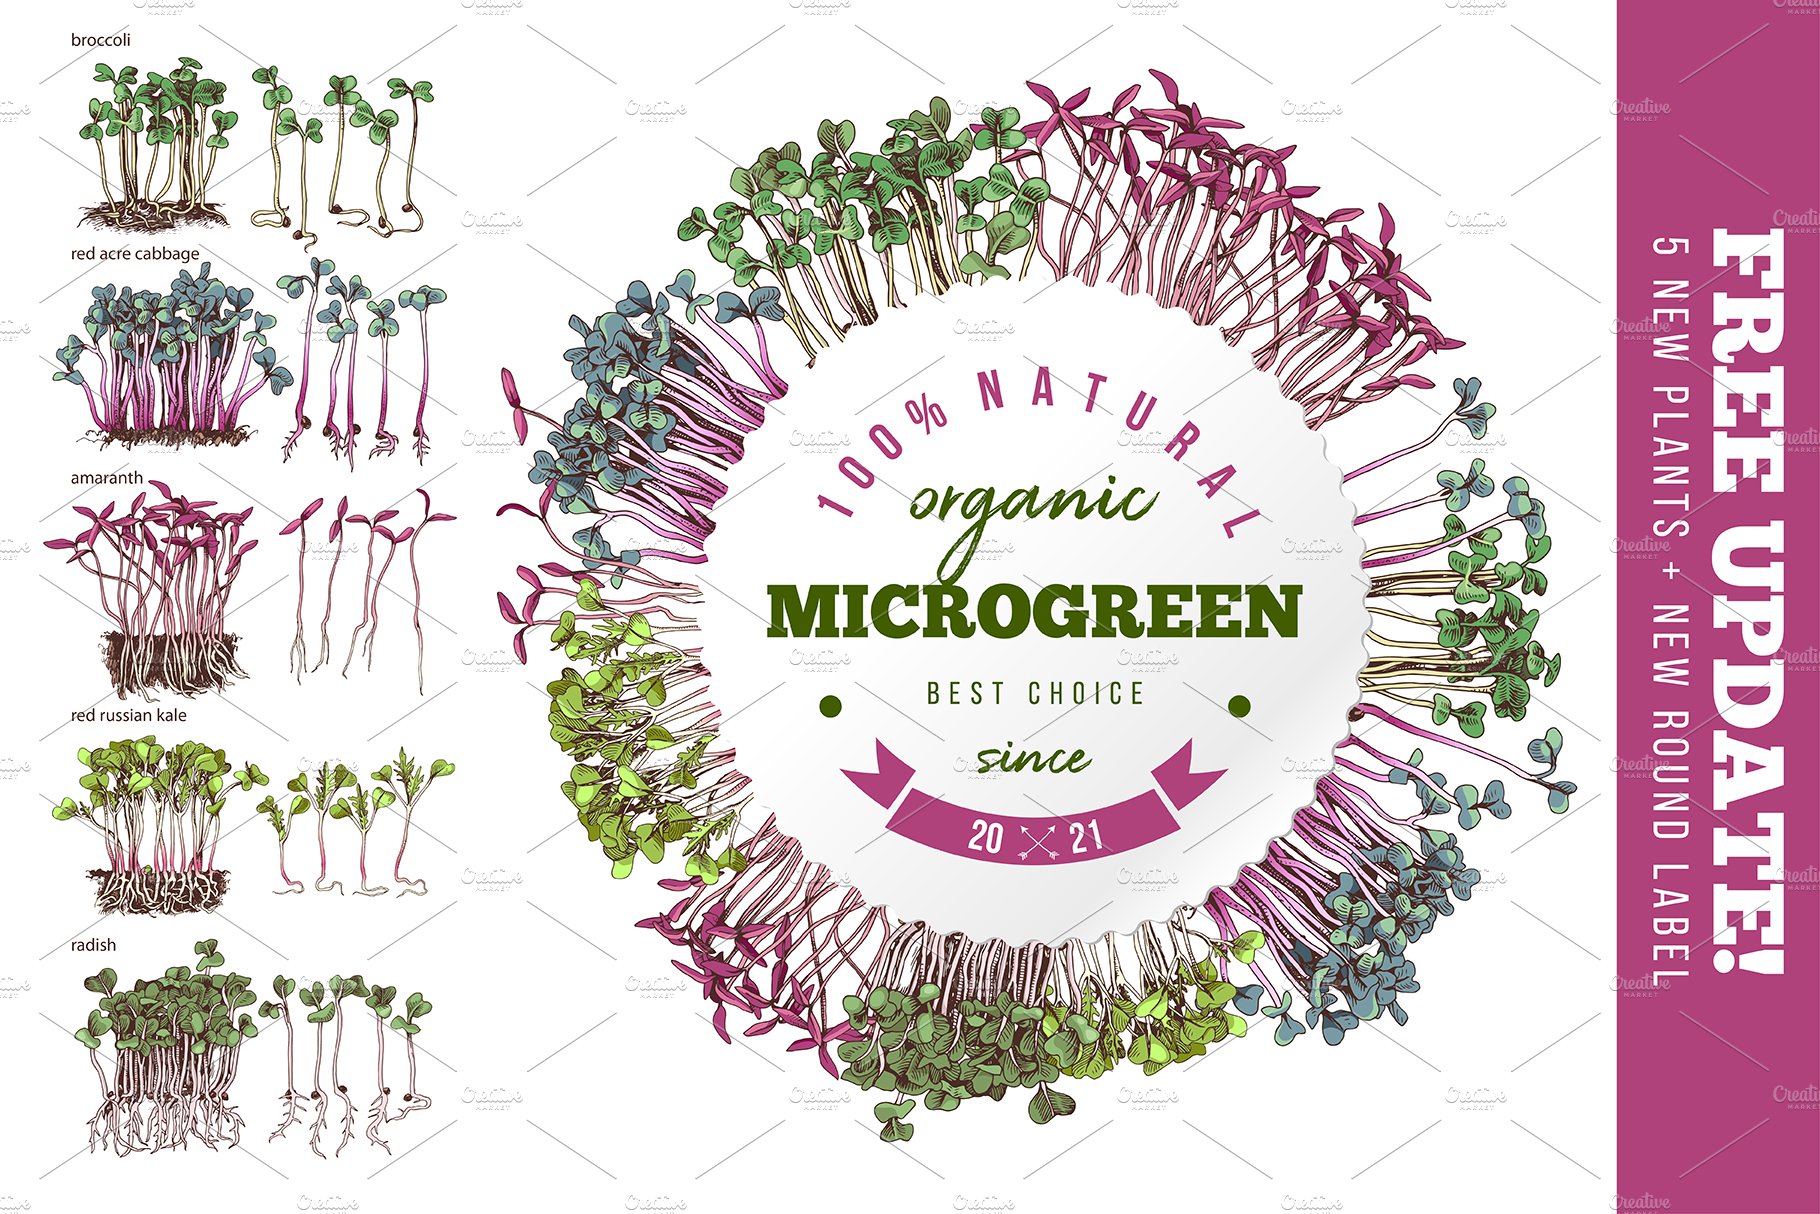 Bunch of different types of microgreen plants.